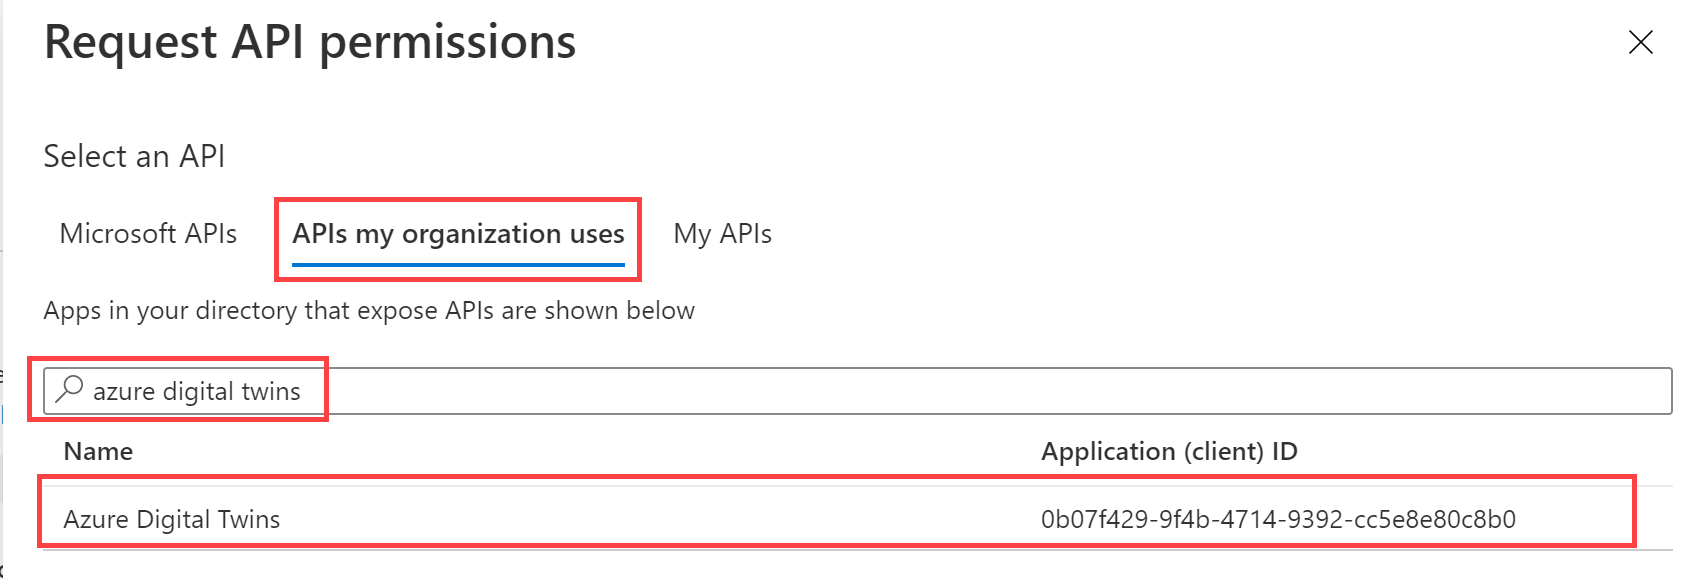 Screenshot of the 'Request API Permissions' page search result in the Azure portal showing Azure Digital Twins.